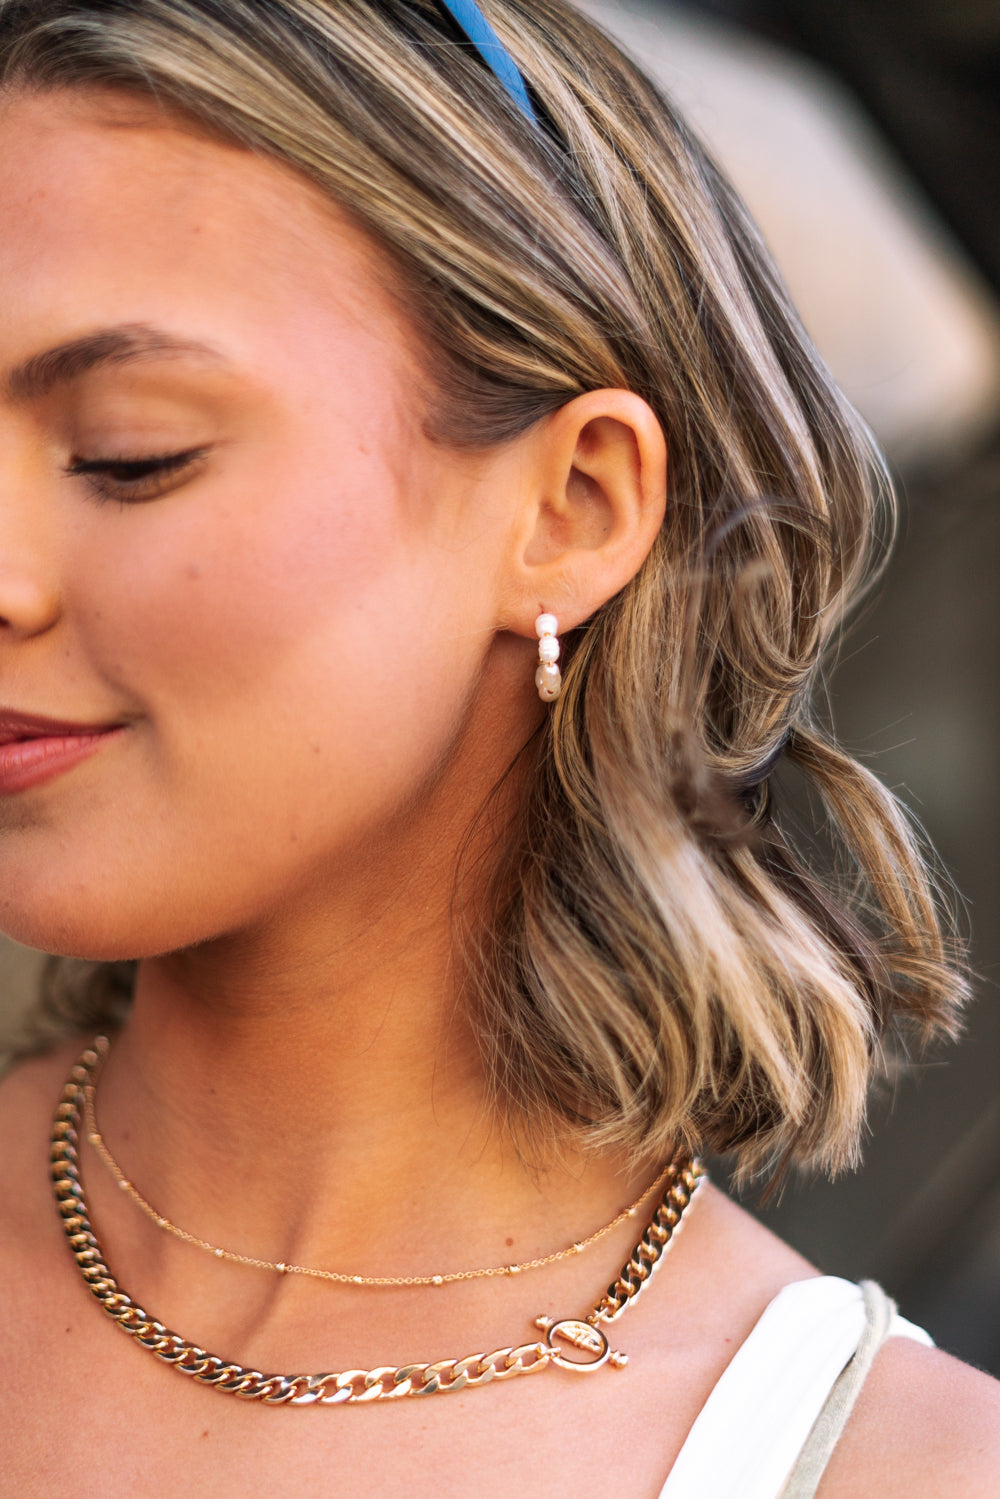 Side view of female model wearing the Meadow Mini Pearl Hoop Earring which features mini, open gold hoops with pearls